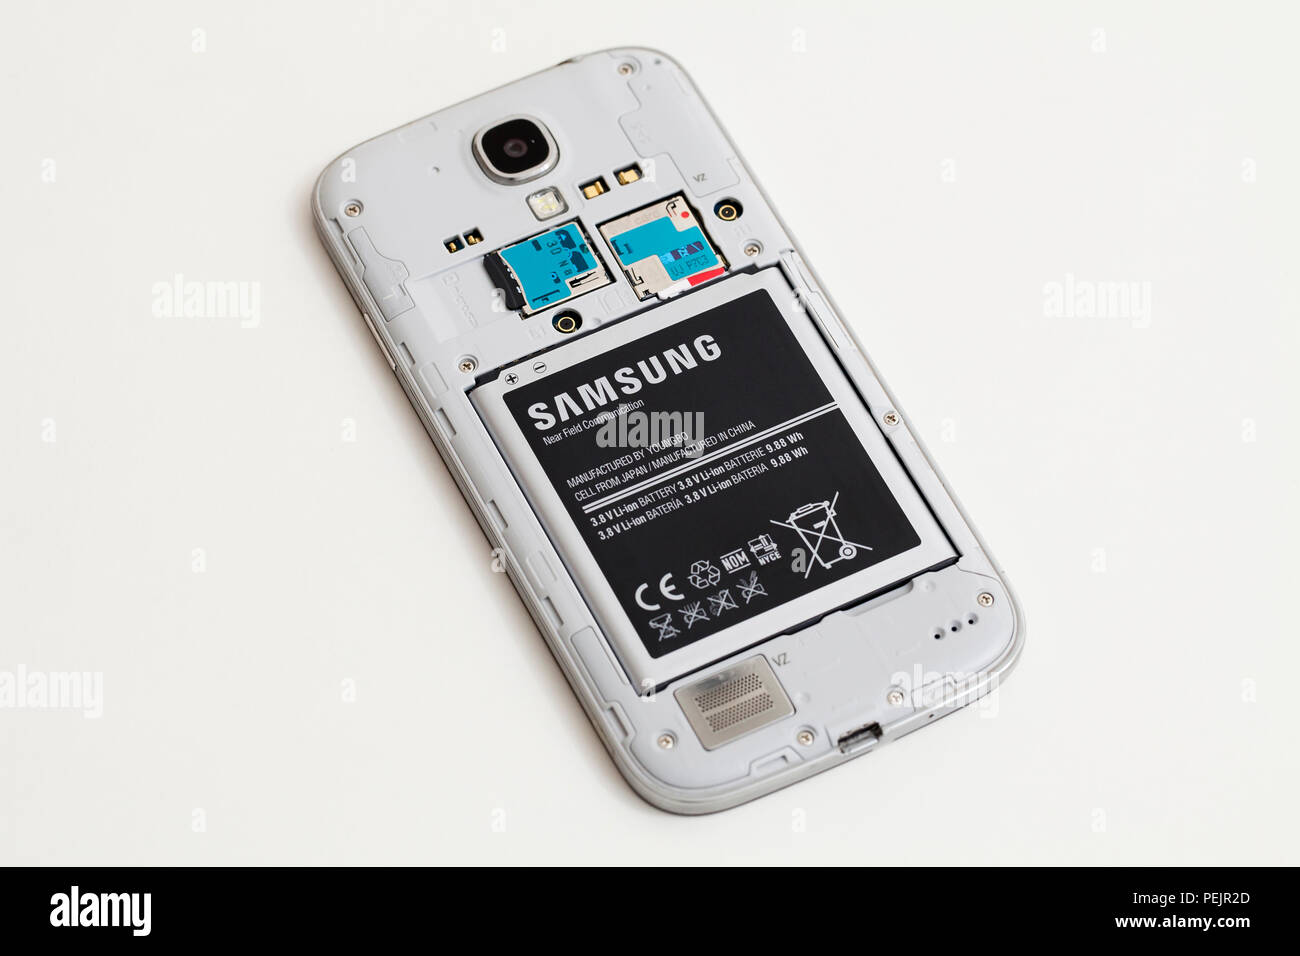 Samsung Galaxy mobile phone with back cover removed, showing Samsung battery - USA Stock Photo